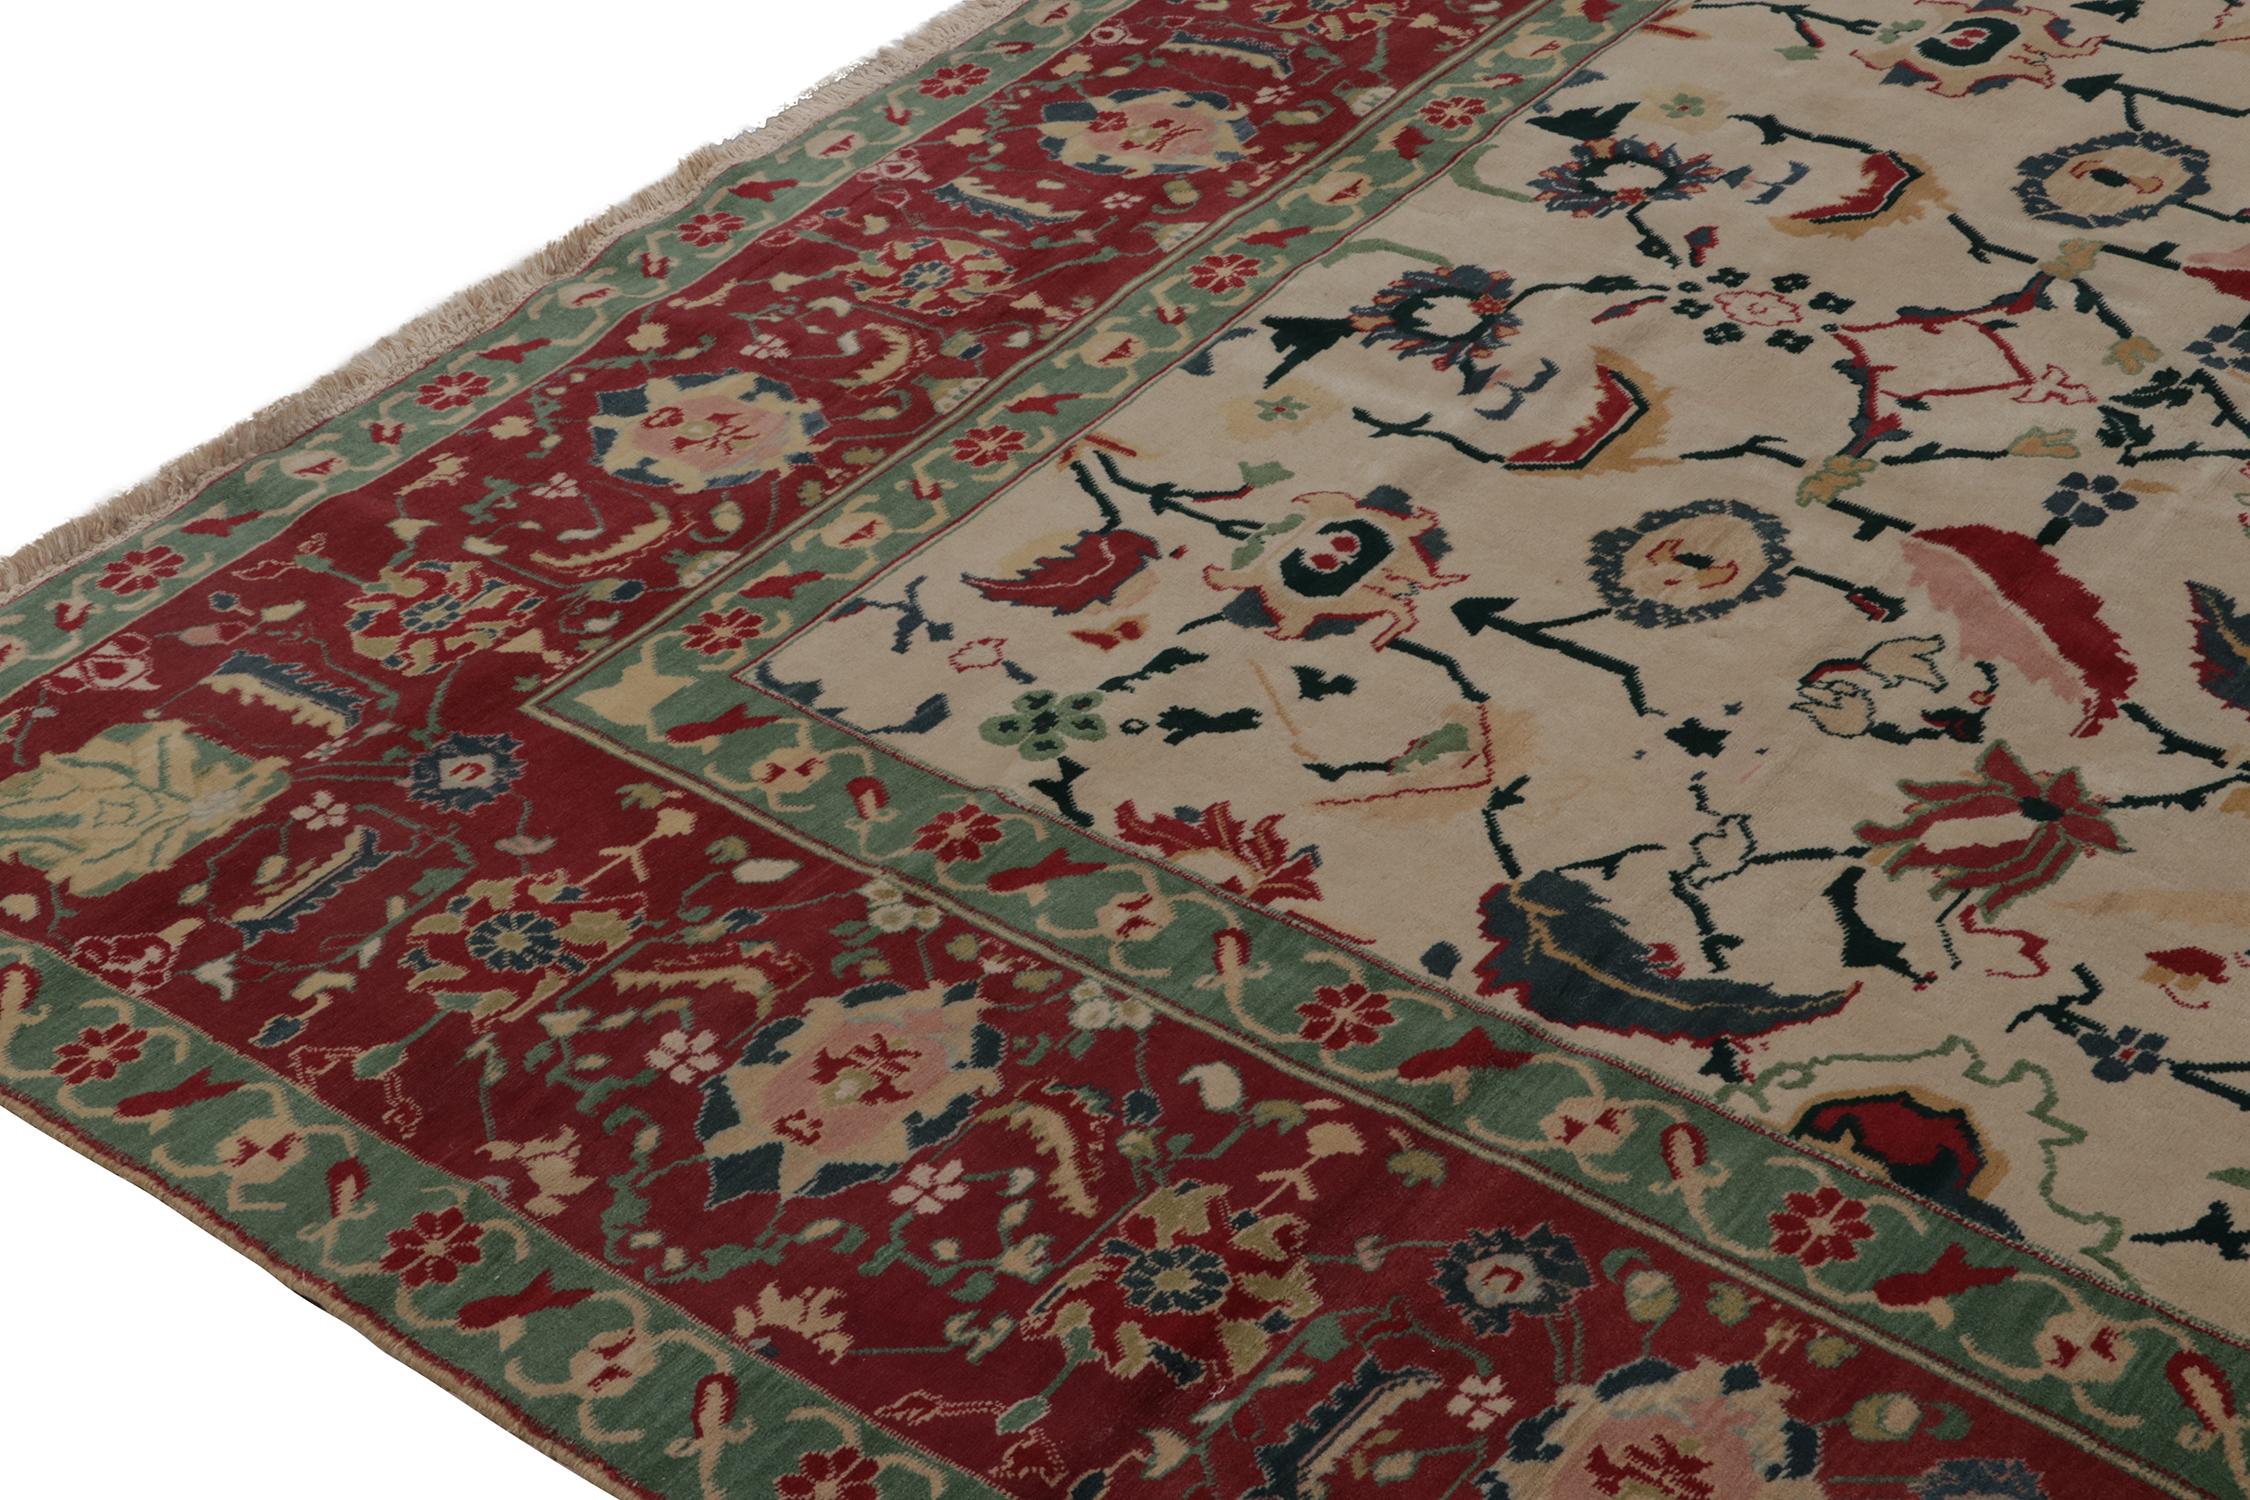 Rug & Kilim’s Traditional Agra style rug in Beige, Red and Teal Floral Pattern In New Condition For Sale In Long Island City, NY